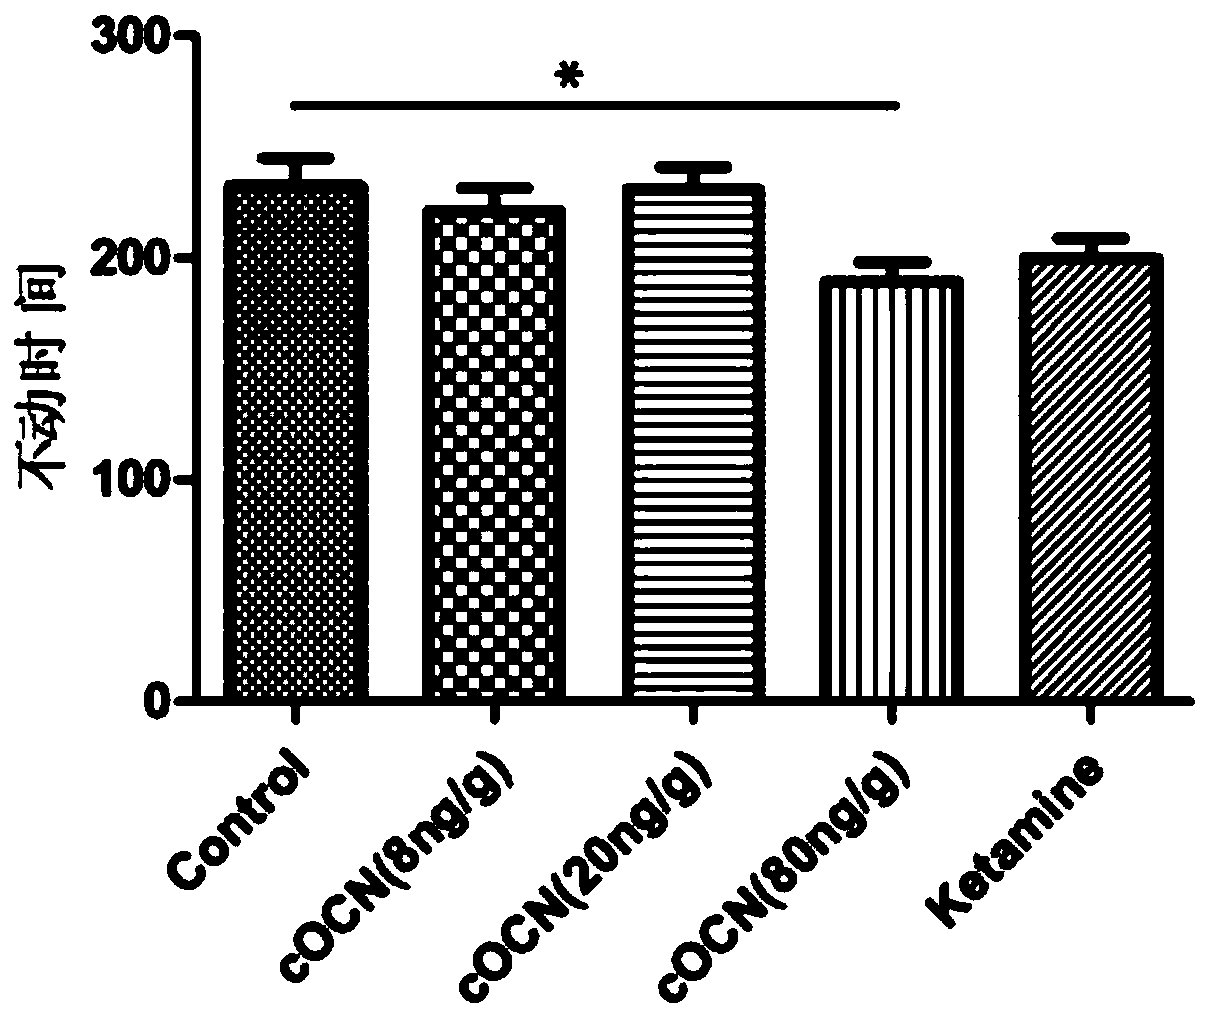 Application of fully carboxylated osteocalcin in the preparation of rapid antidepressants